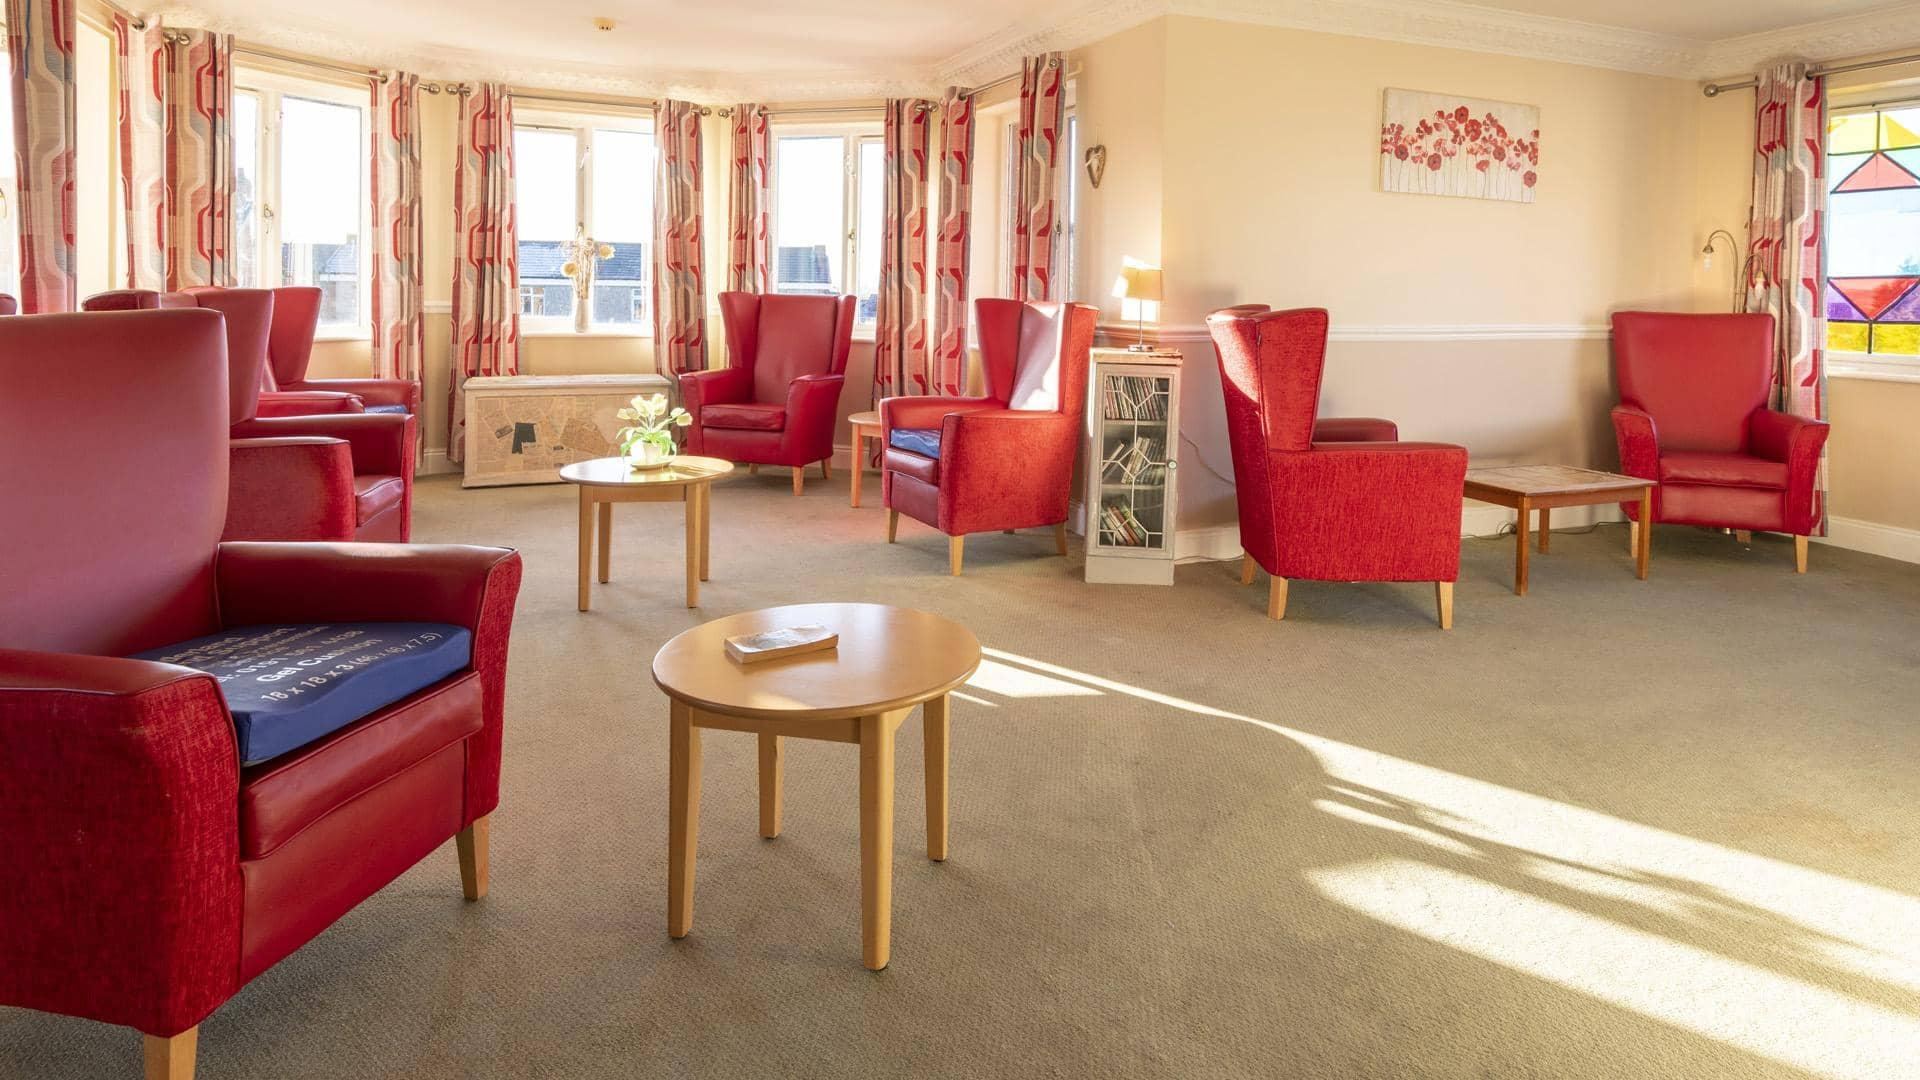 Paddock Stile Manor Lounge residential care